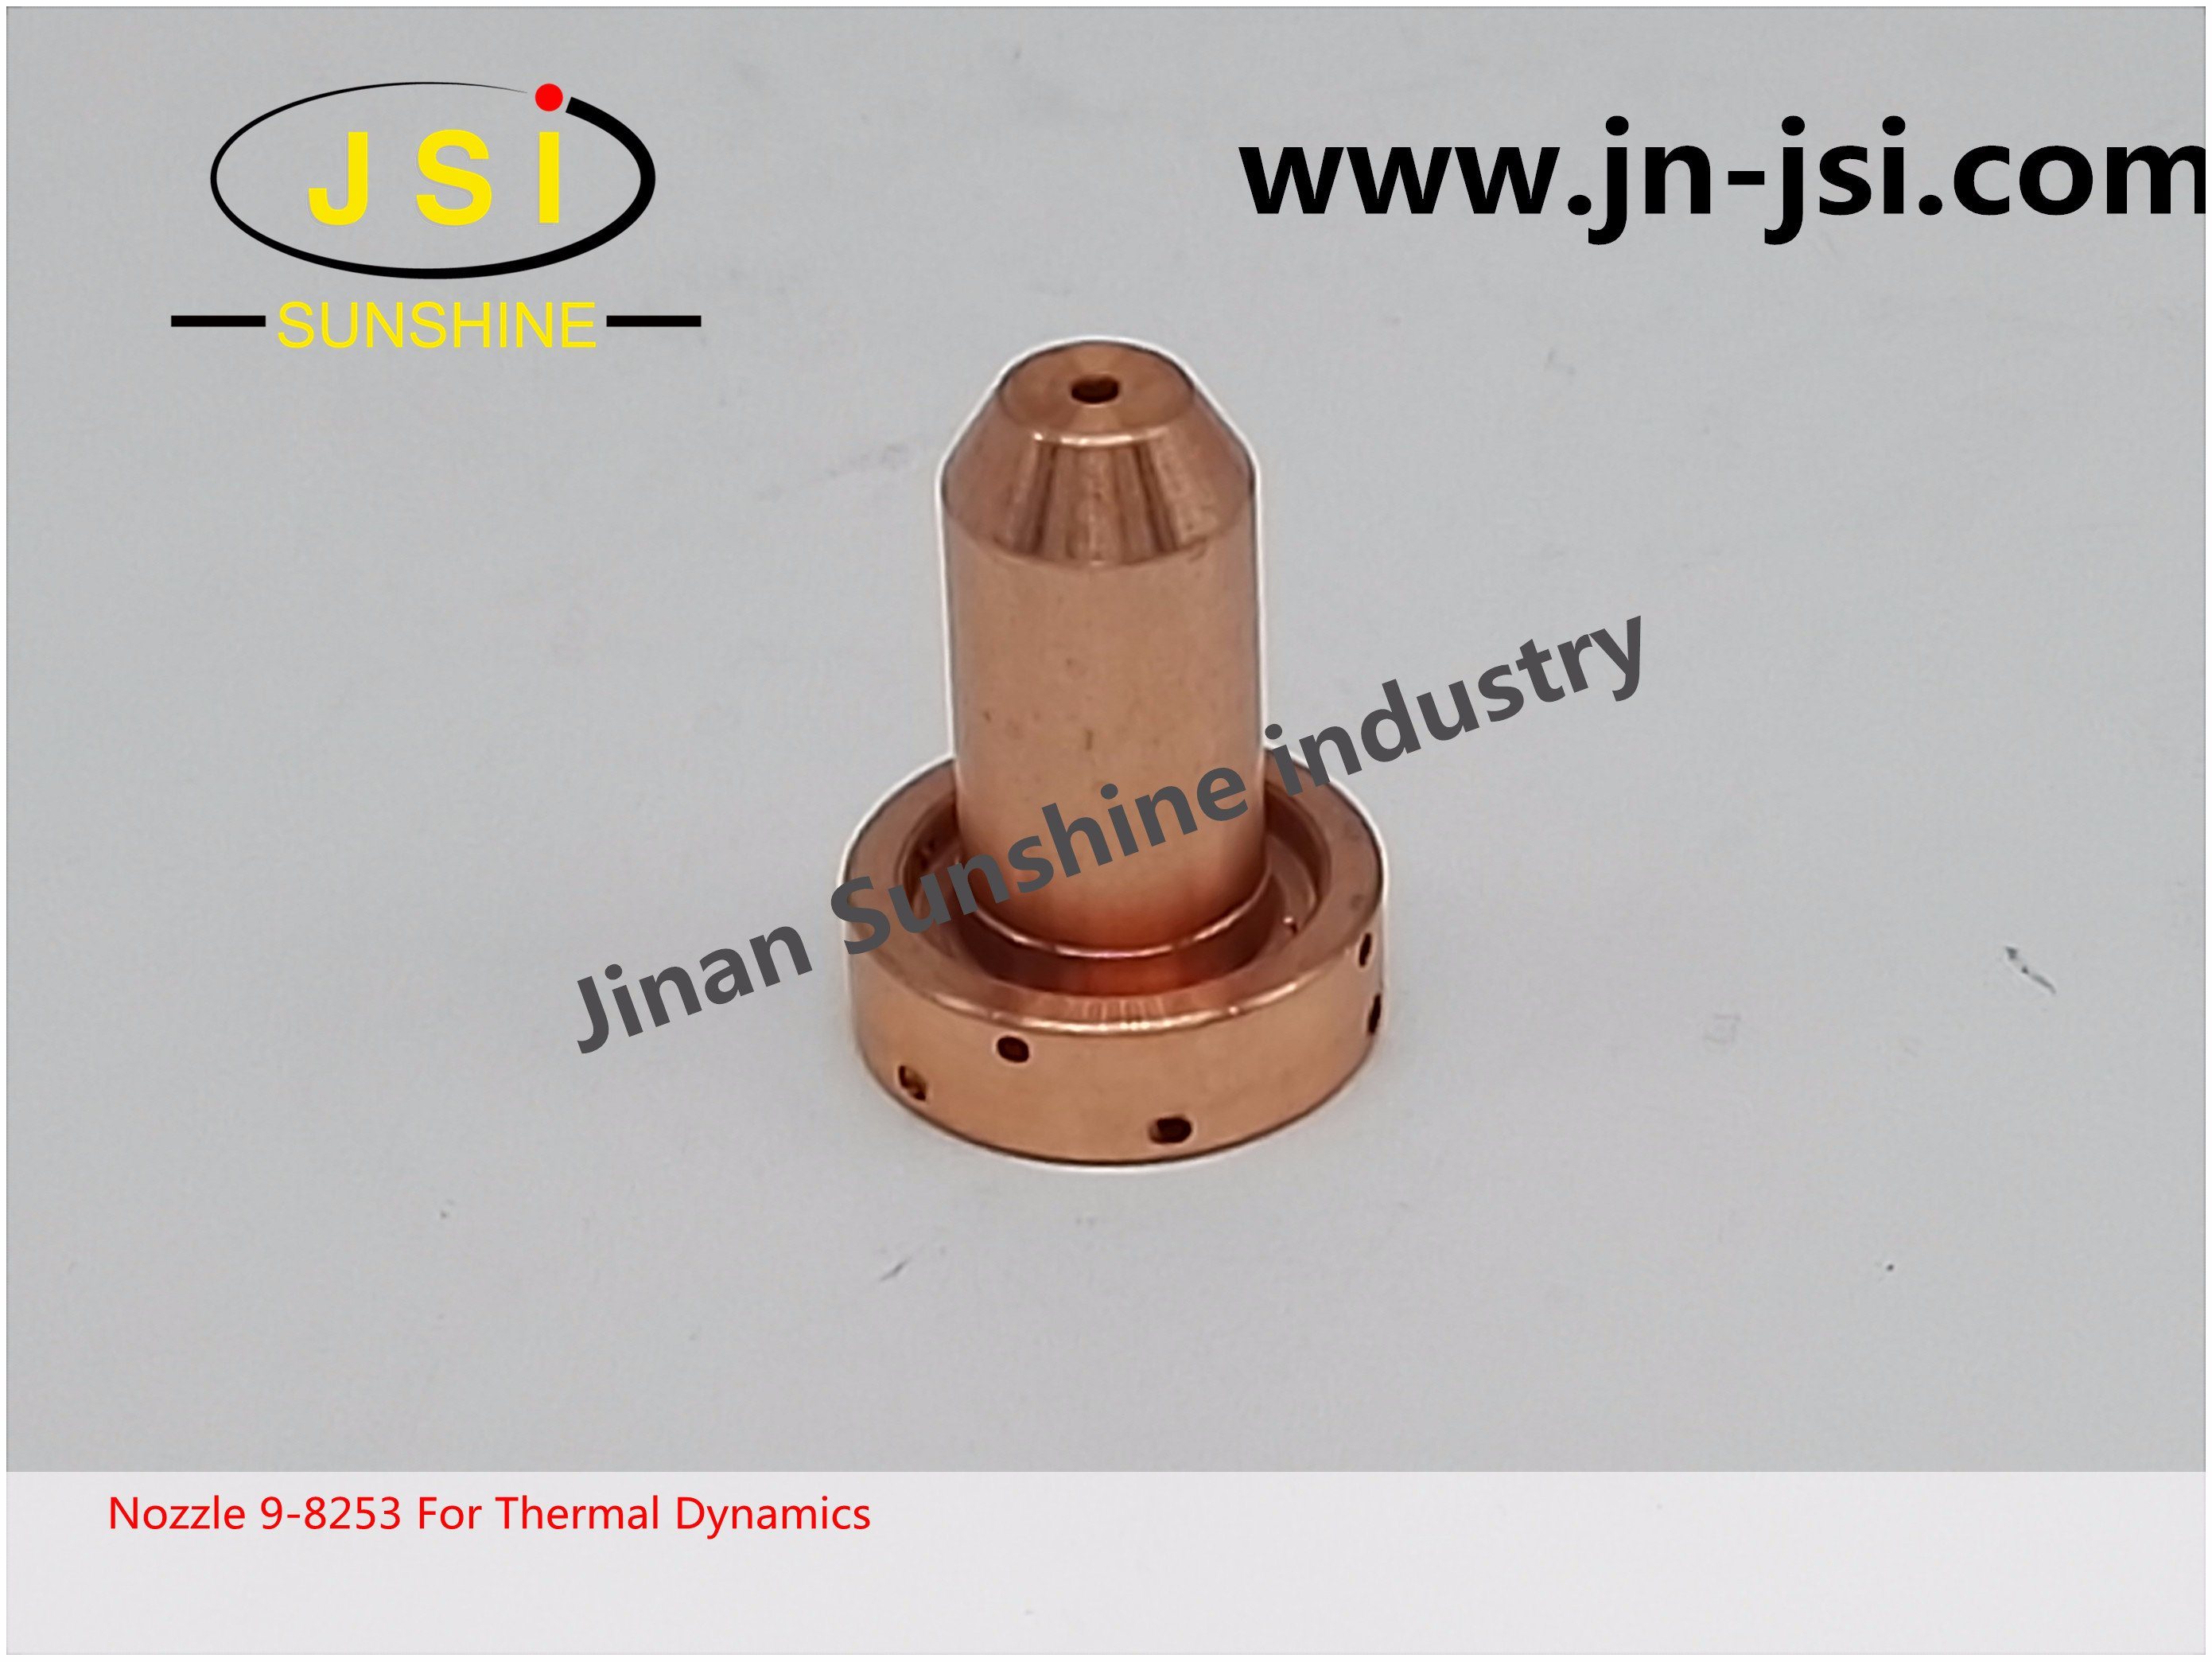 Nozzle 9-8253 for Thermal Dynamics Plasma Cutting Torch